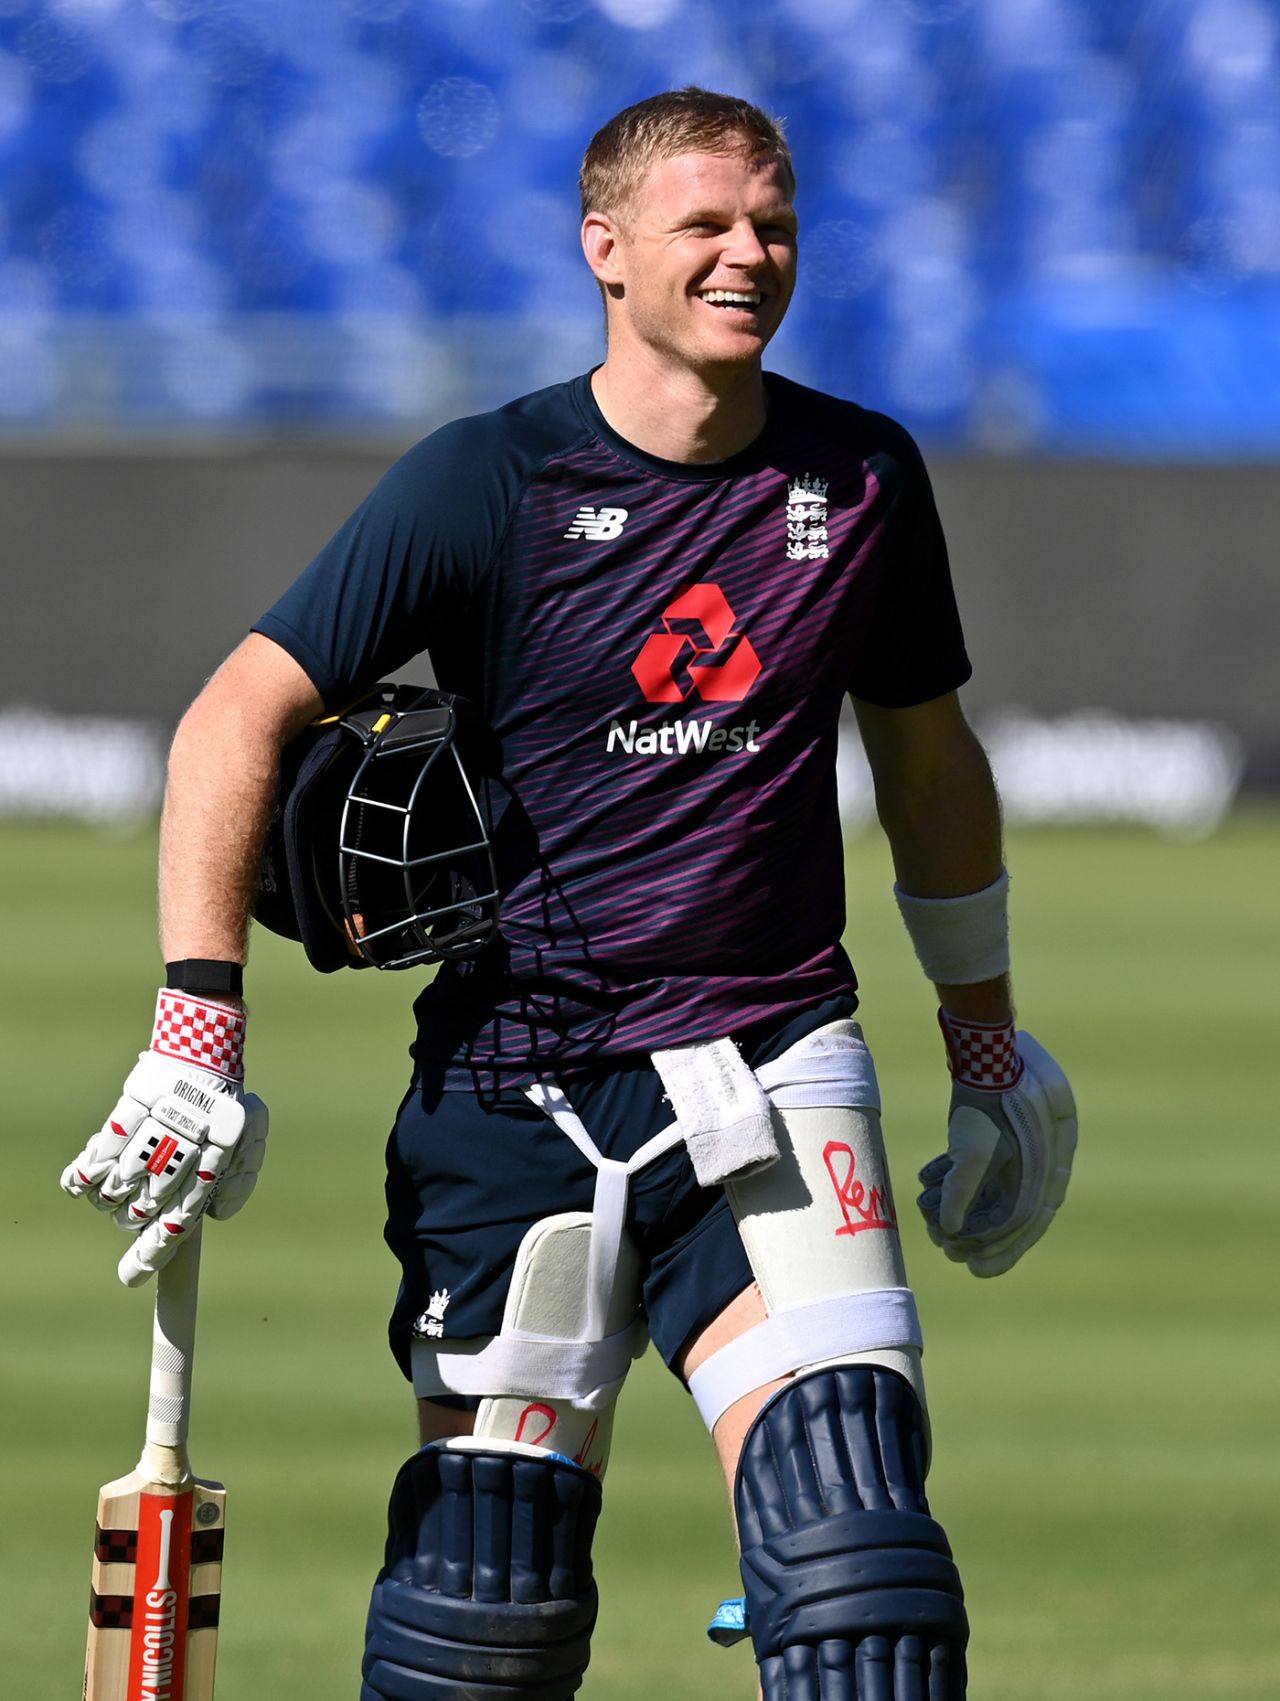 Sam Billings in training, South Africa vs England, Newlands, Cape Town, ODI series, December 3, 2020